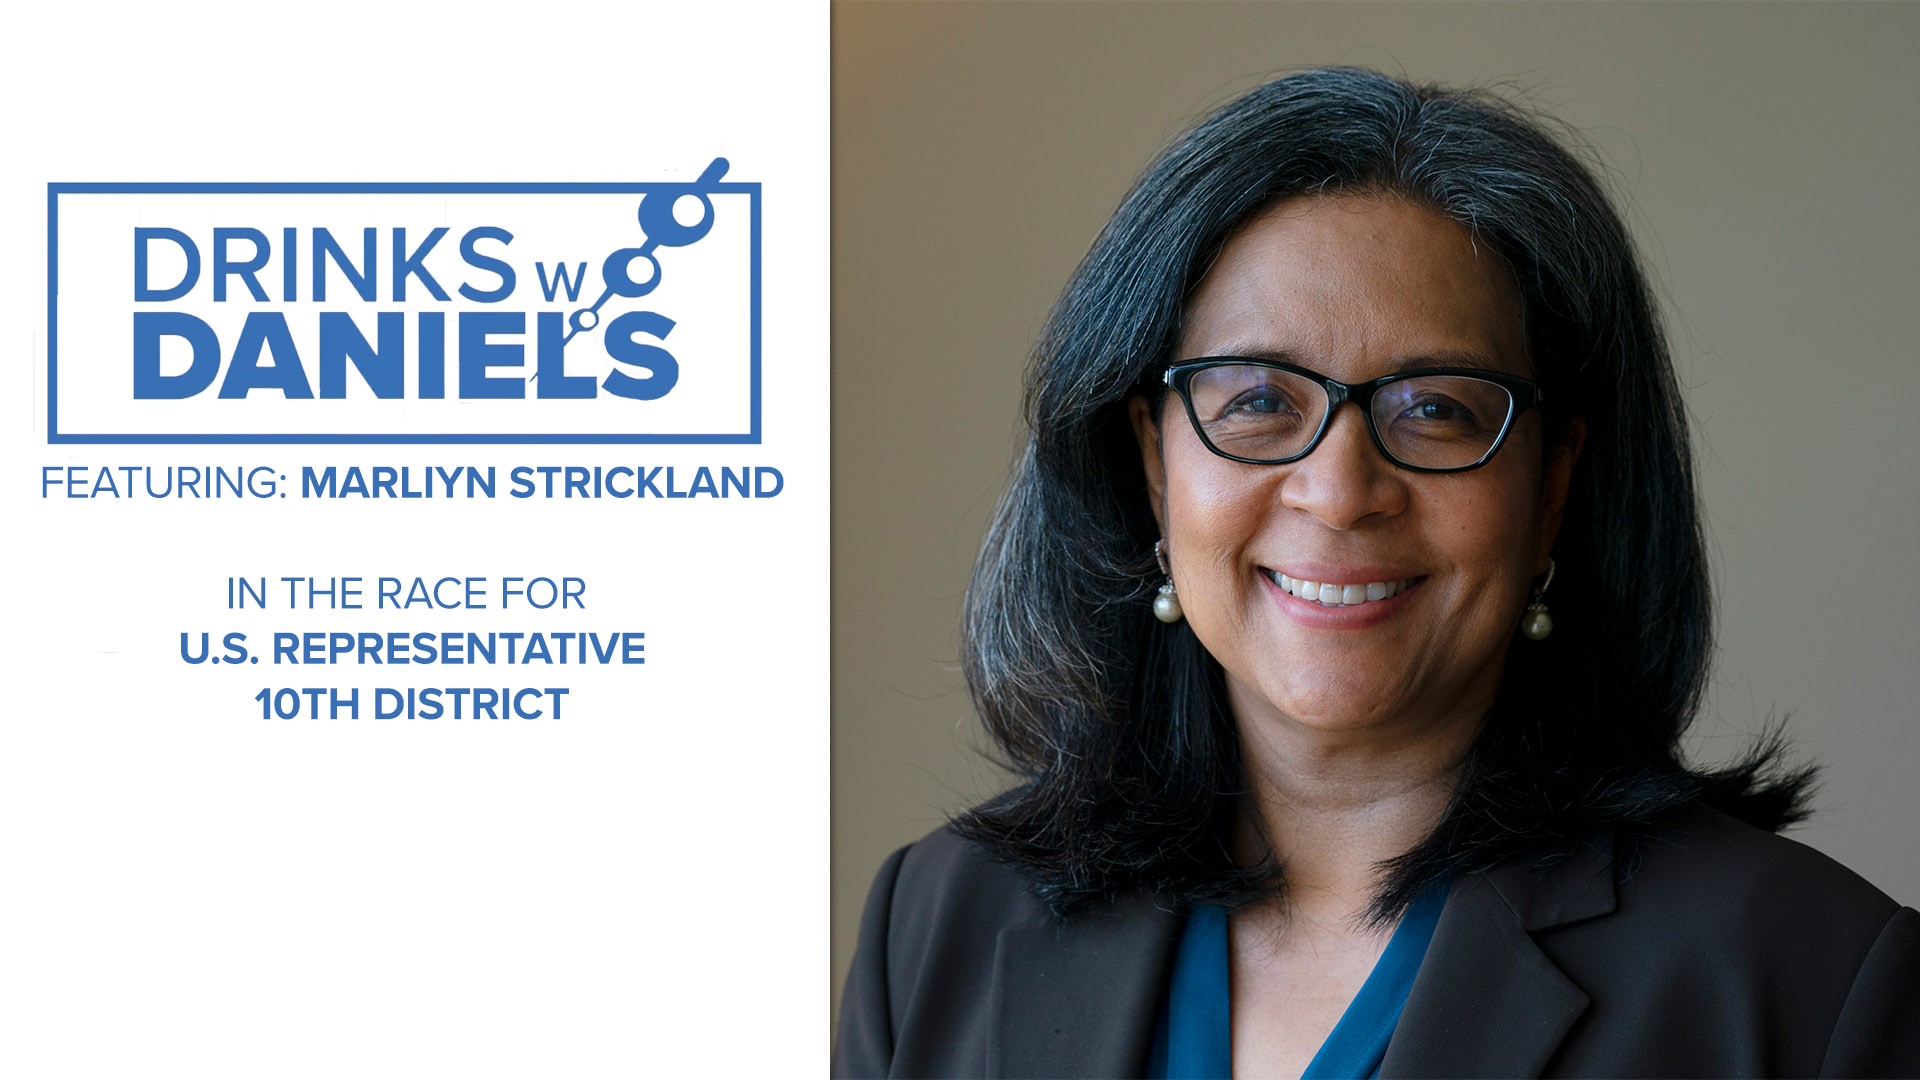 KING 5 chief political analyst Chris Daniels sits down with Marilyn Strickland, who is running for a seat representing the 10th Congressional District.